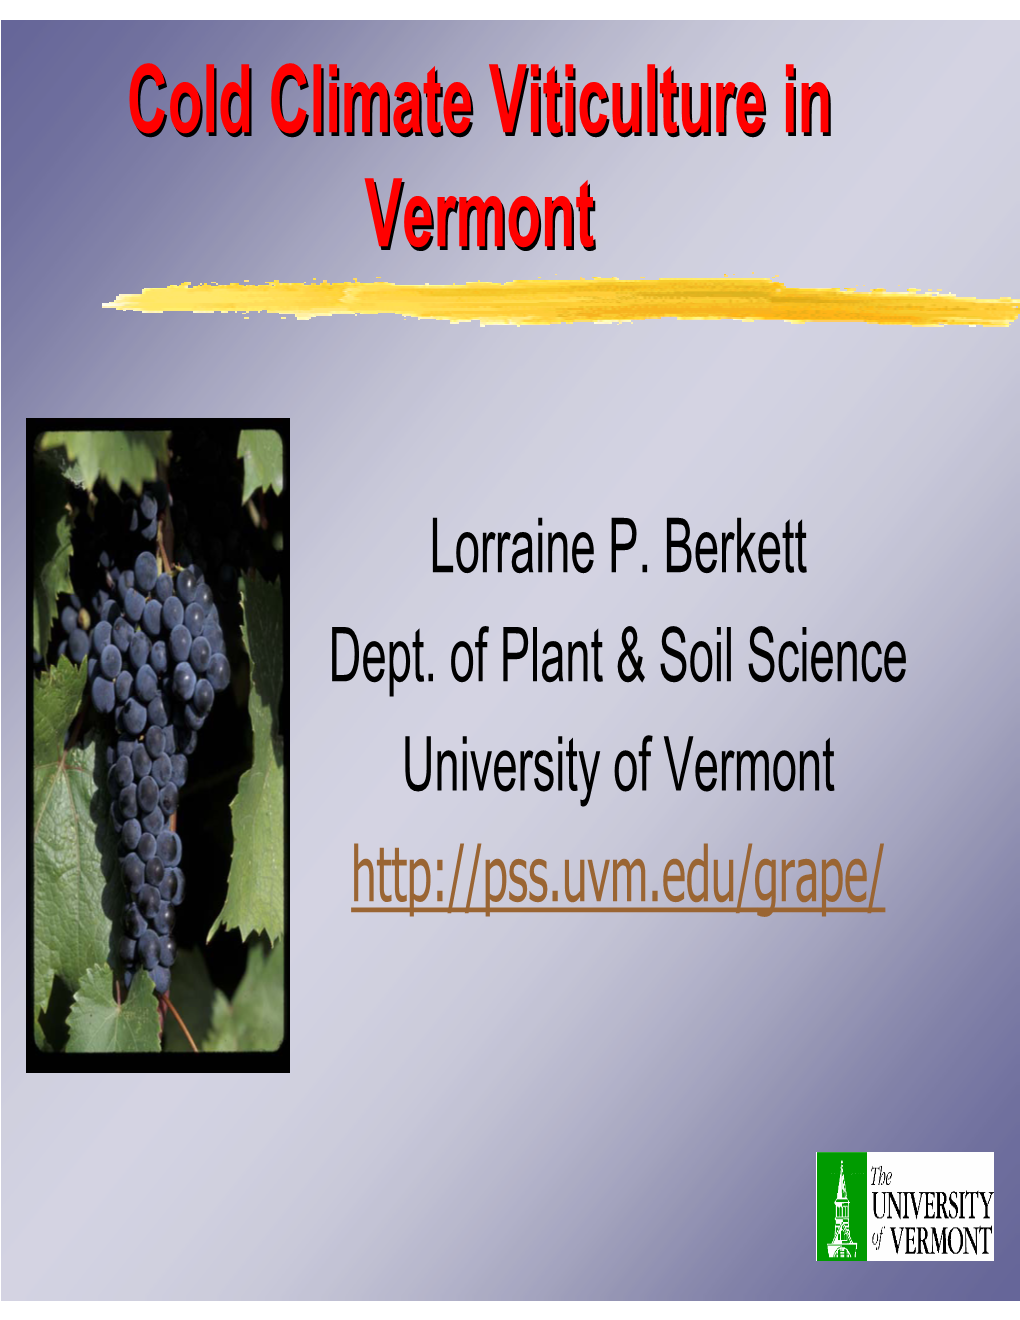 Cold Climate Viticulture in Vermont